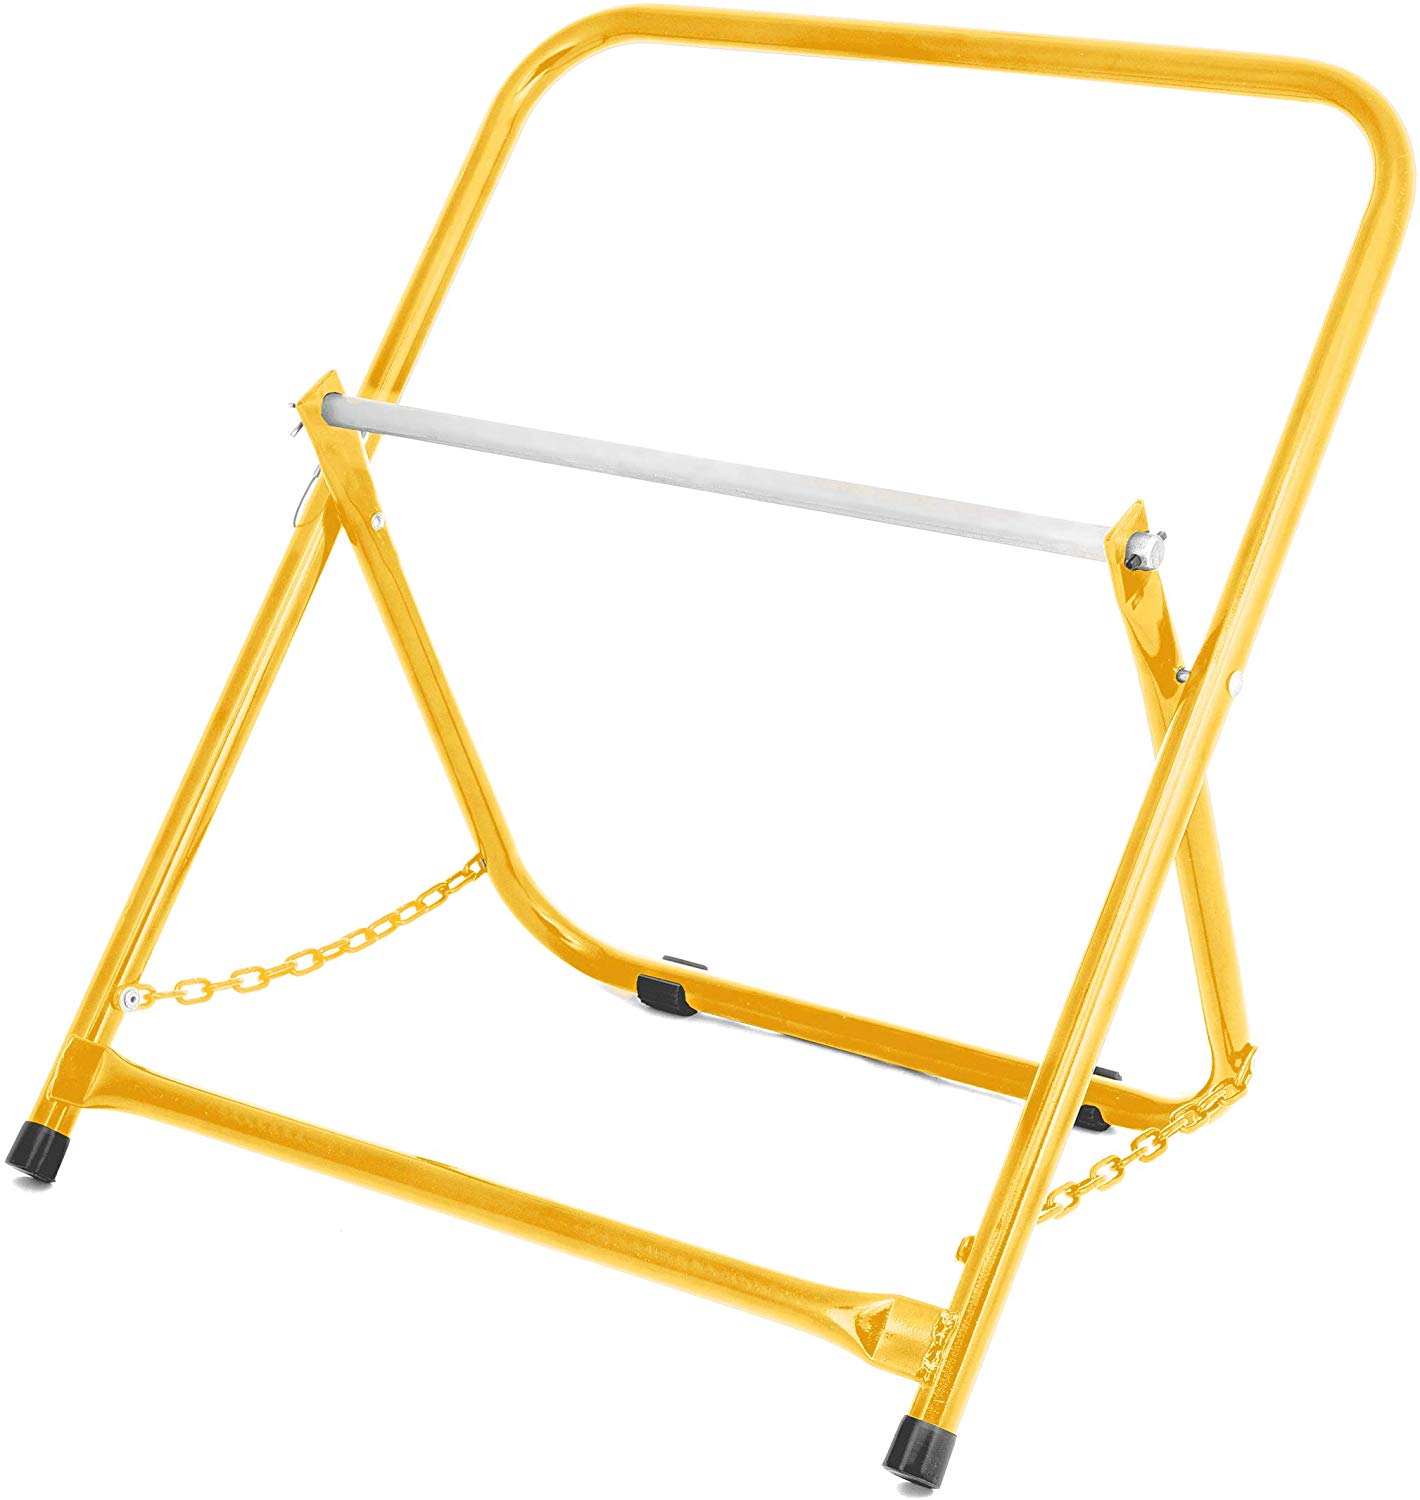 AdirPro Foldable Wire Cable Caddy in Yellow